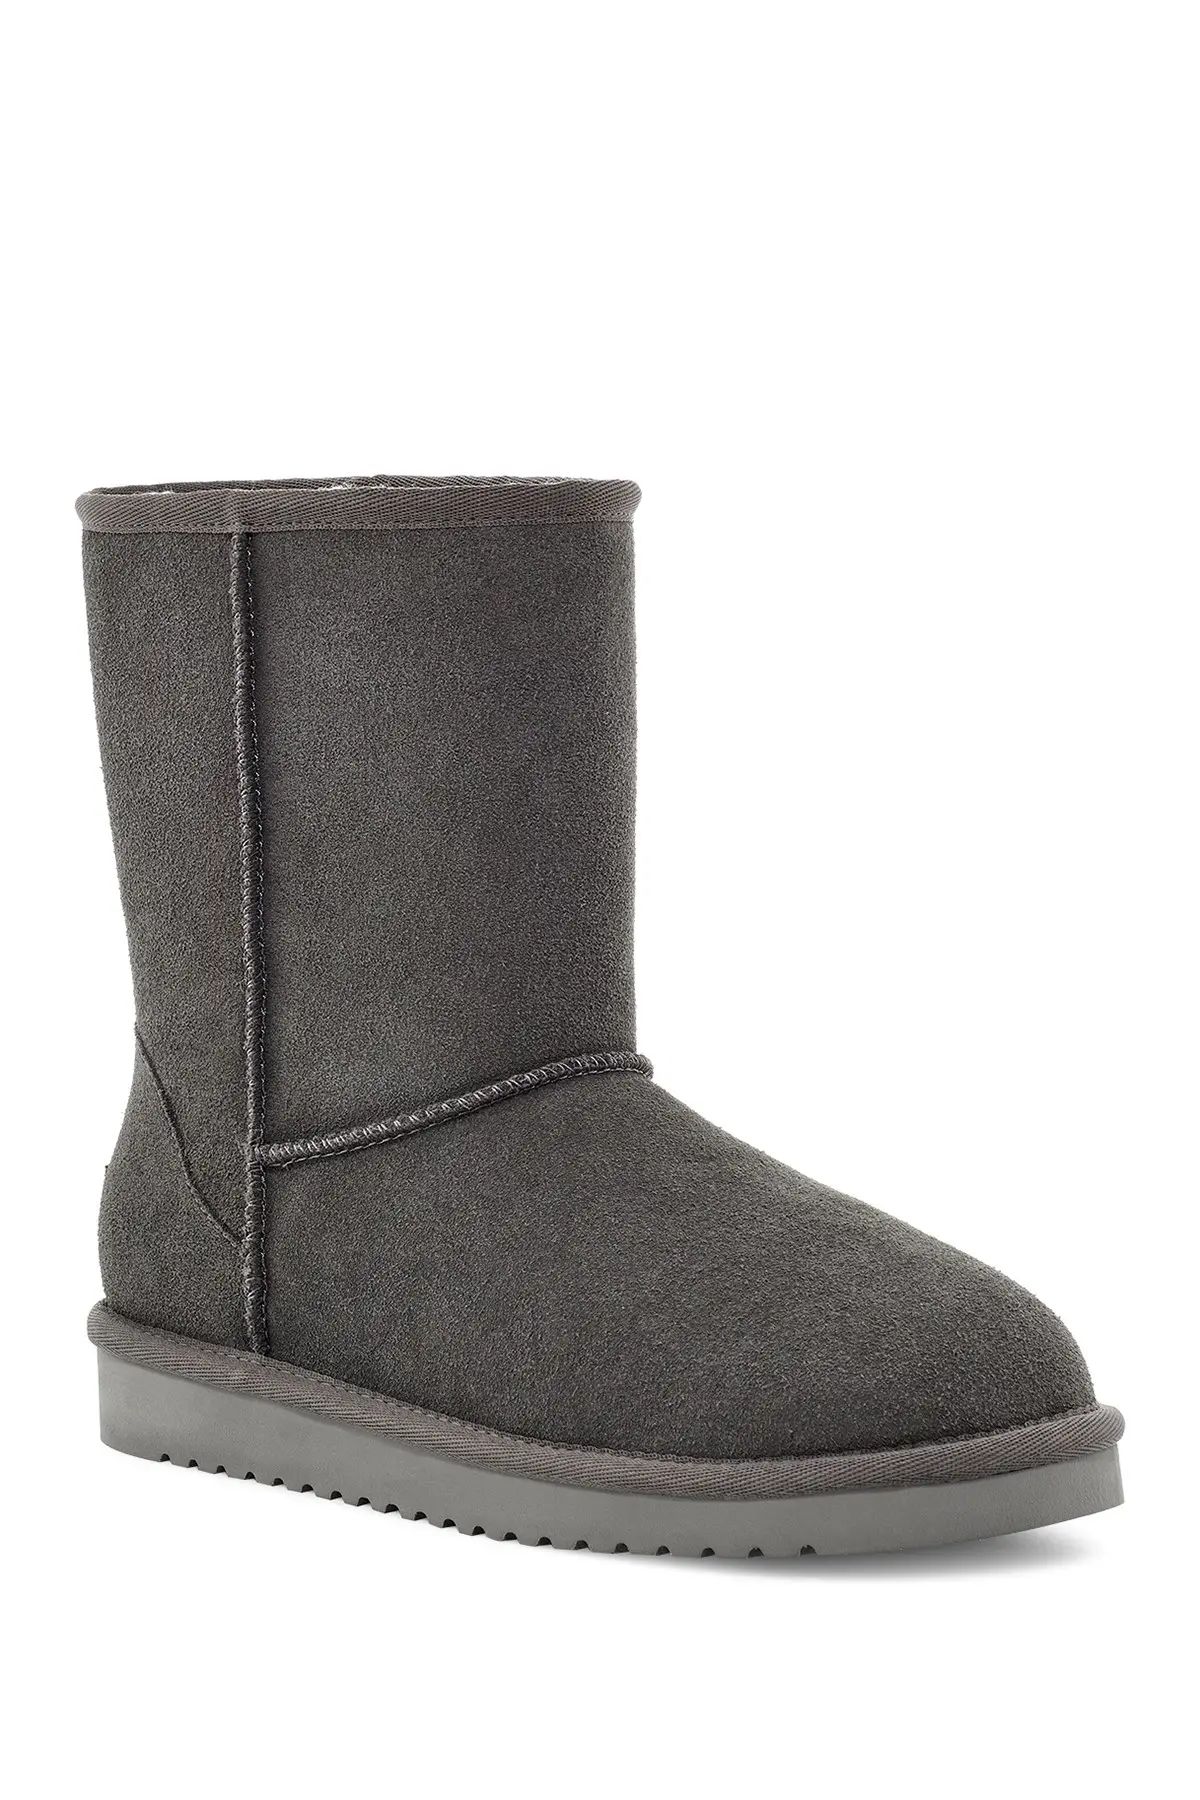 KOOLABURRA BY UGG | Classic Short Genuine Shearling & Faux Fur Lined Boot - Wide Width Available ... | Nordstrom Rack